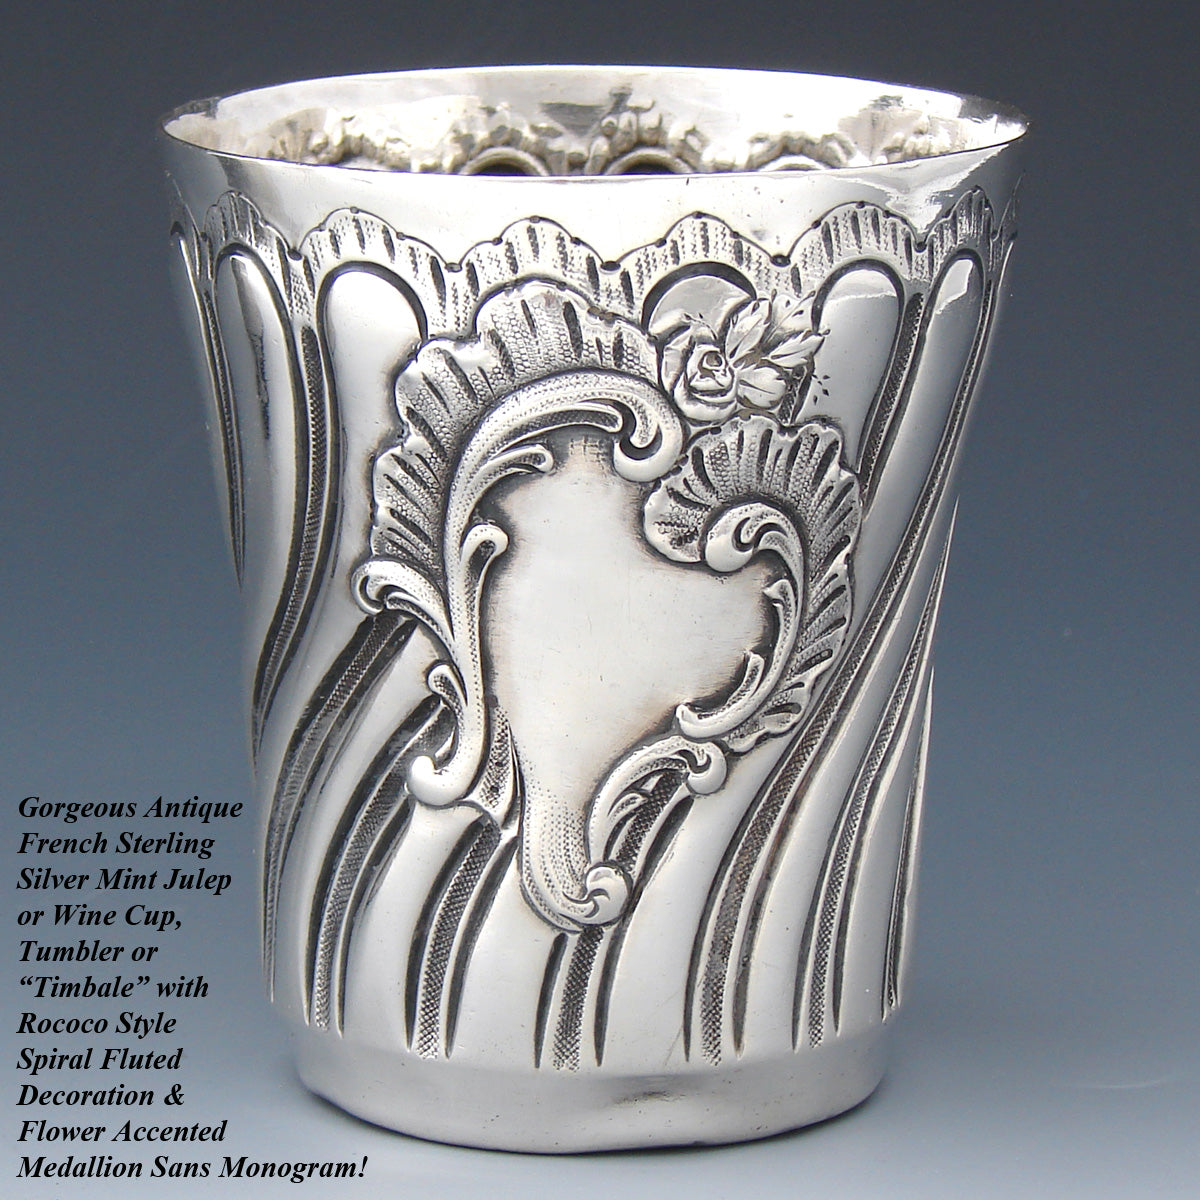 Antique French Sterling Silver Mint Julep or Wine Cup, Tumbler or Timbale, Spiraled Rococo